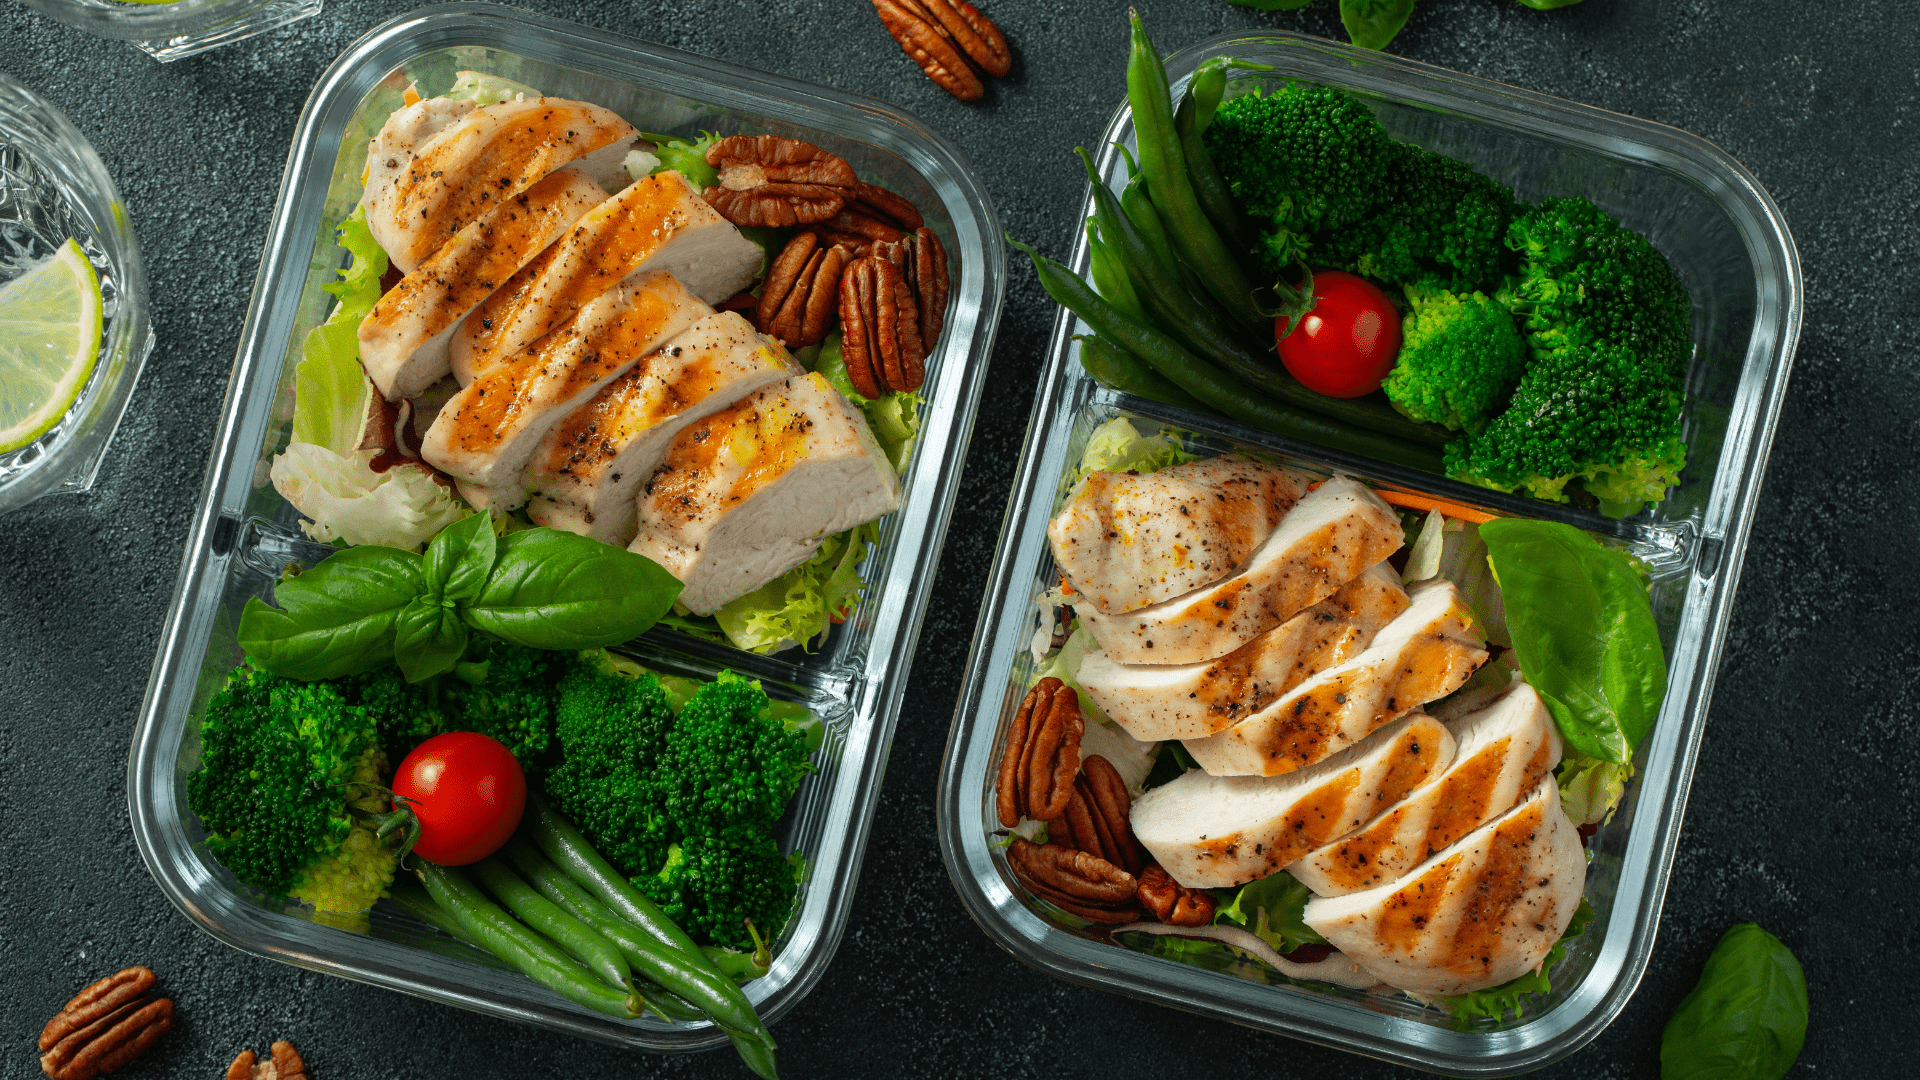 A delicious meal that has been prepped and packed for easy grab and go eating.